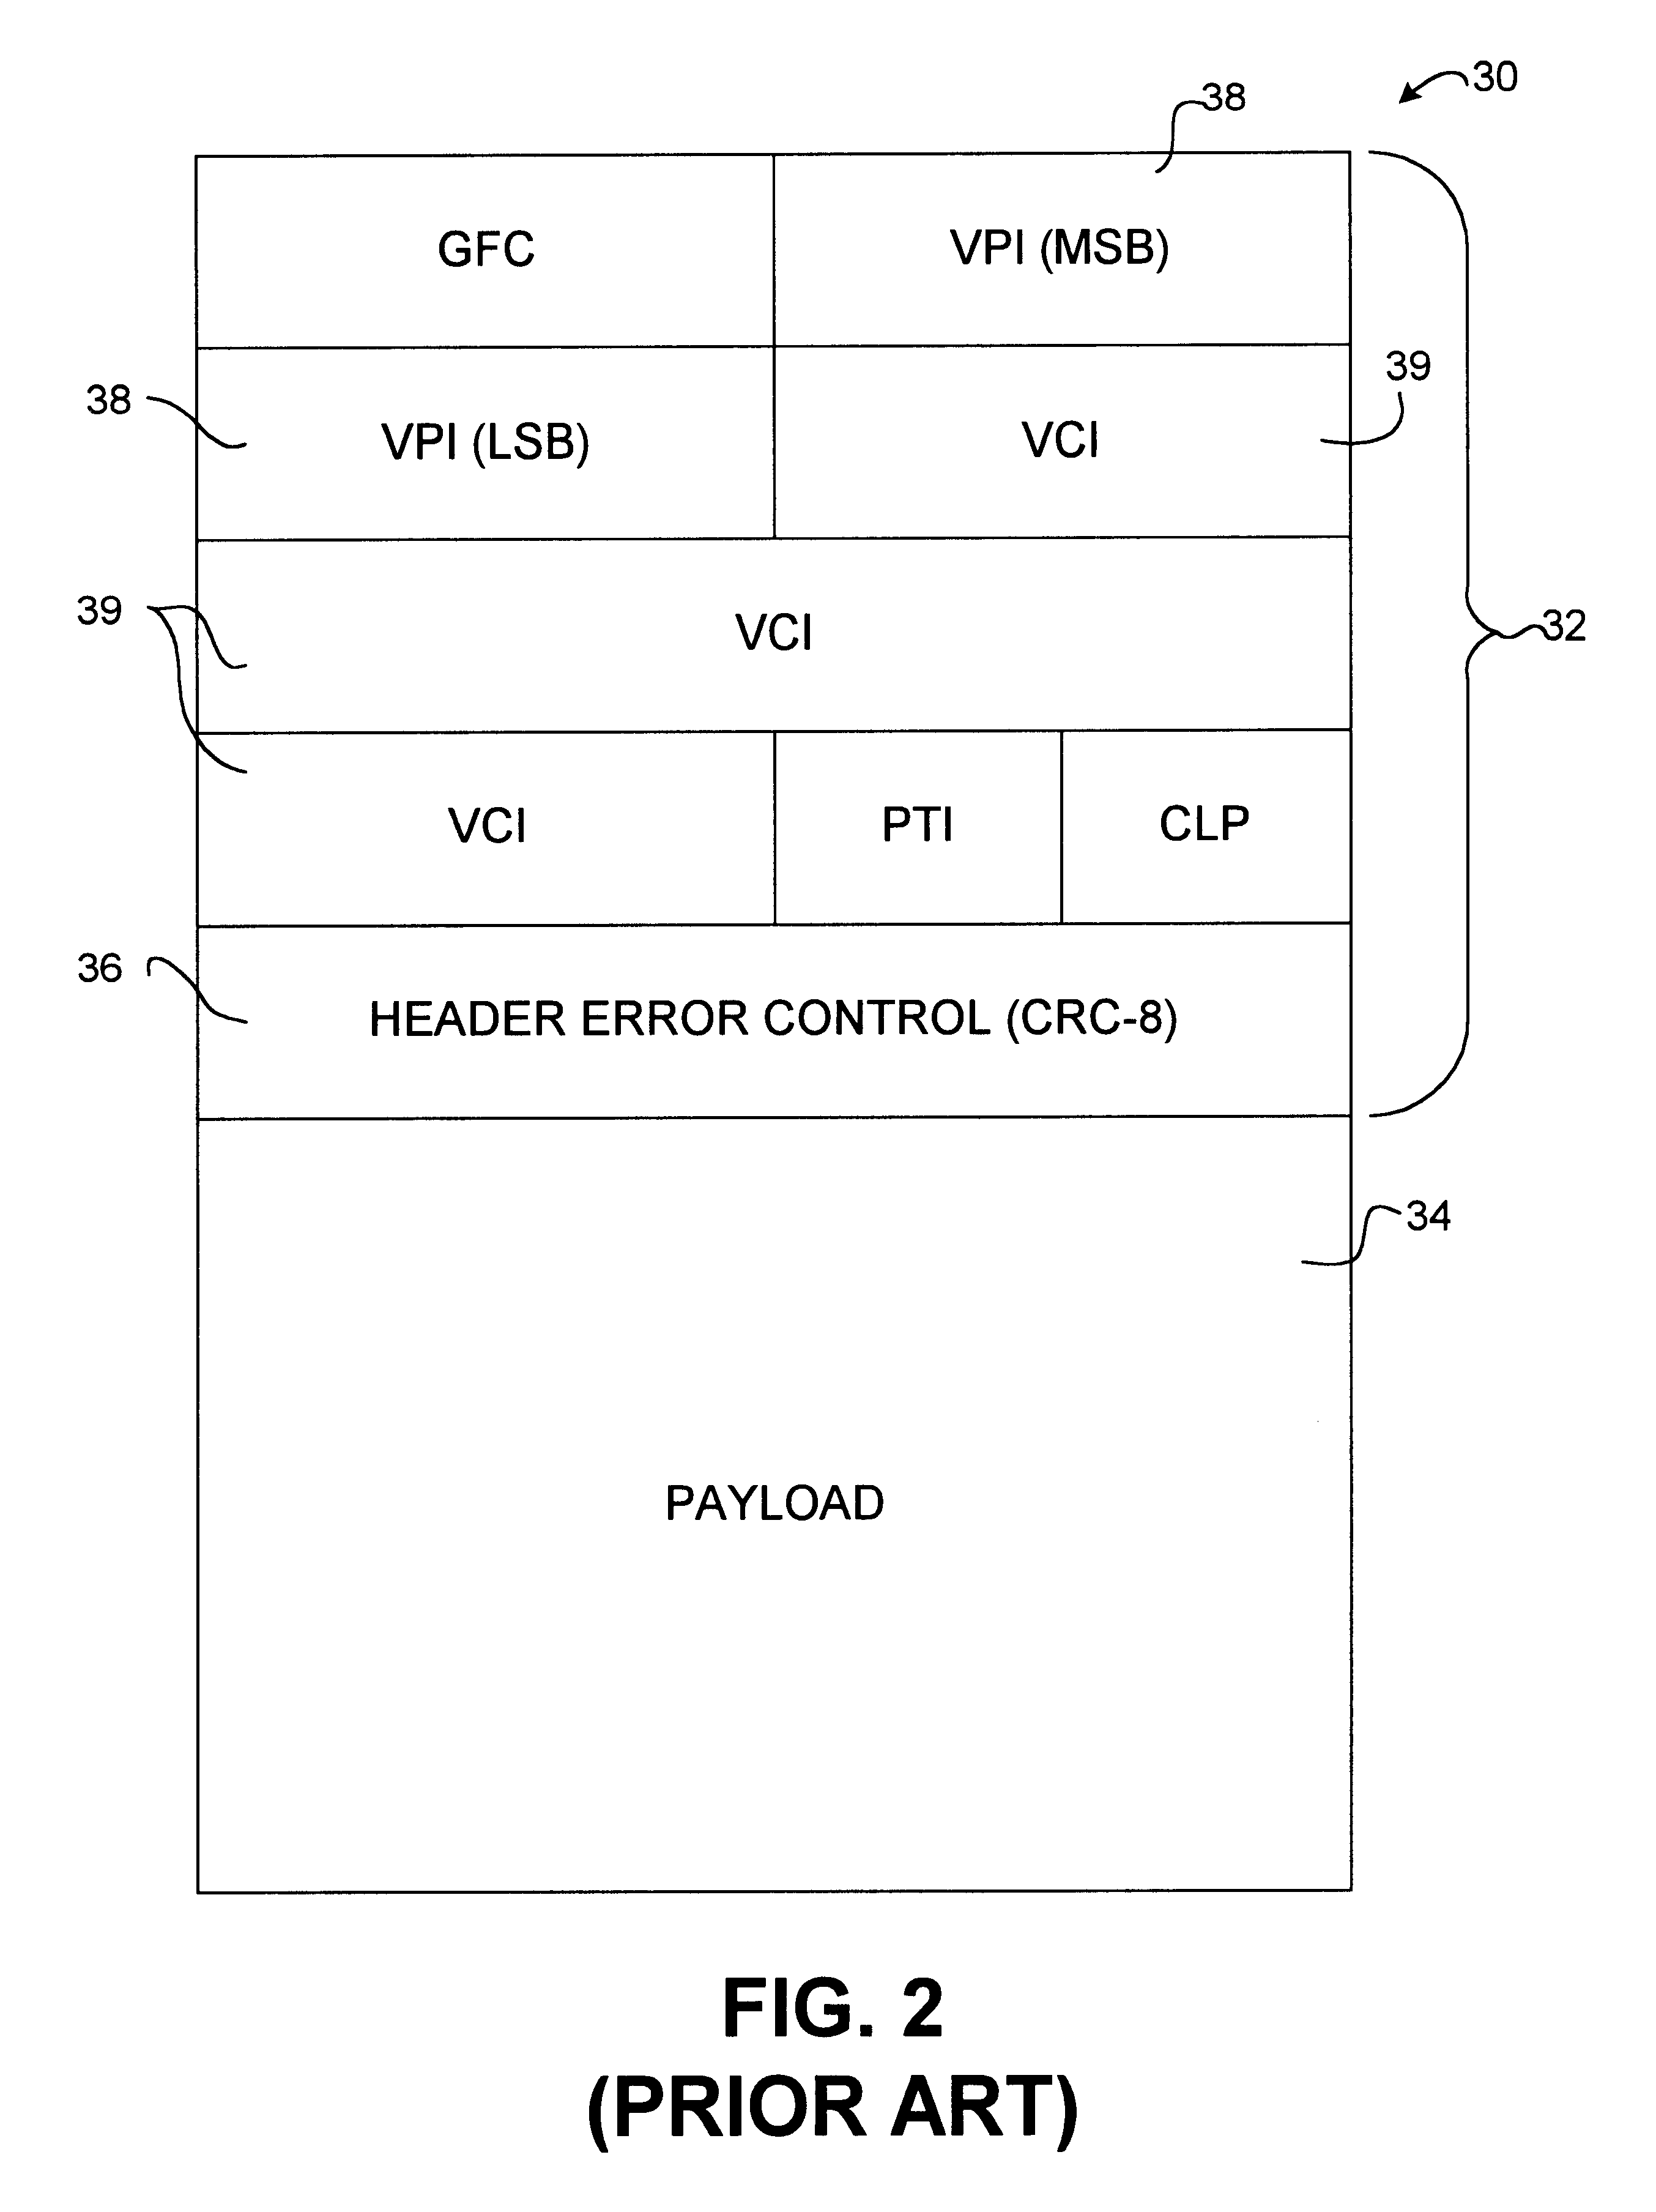 Method and devices for cell loss detection in ATM telecommunication devices